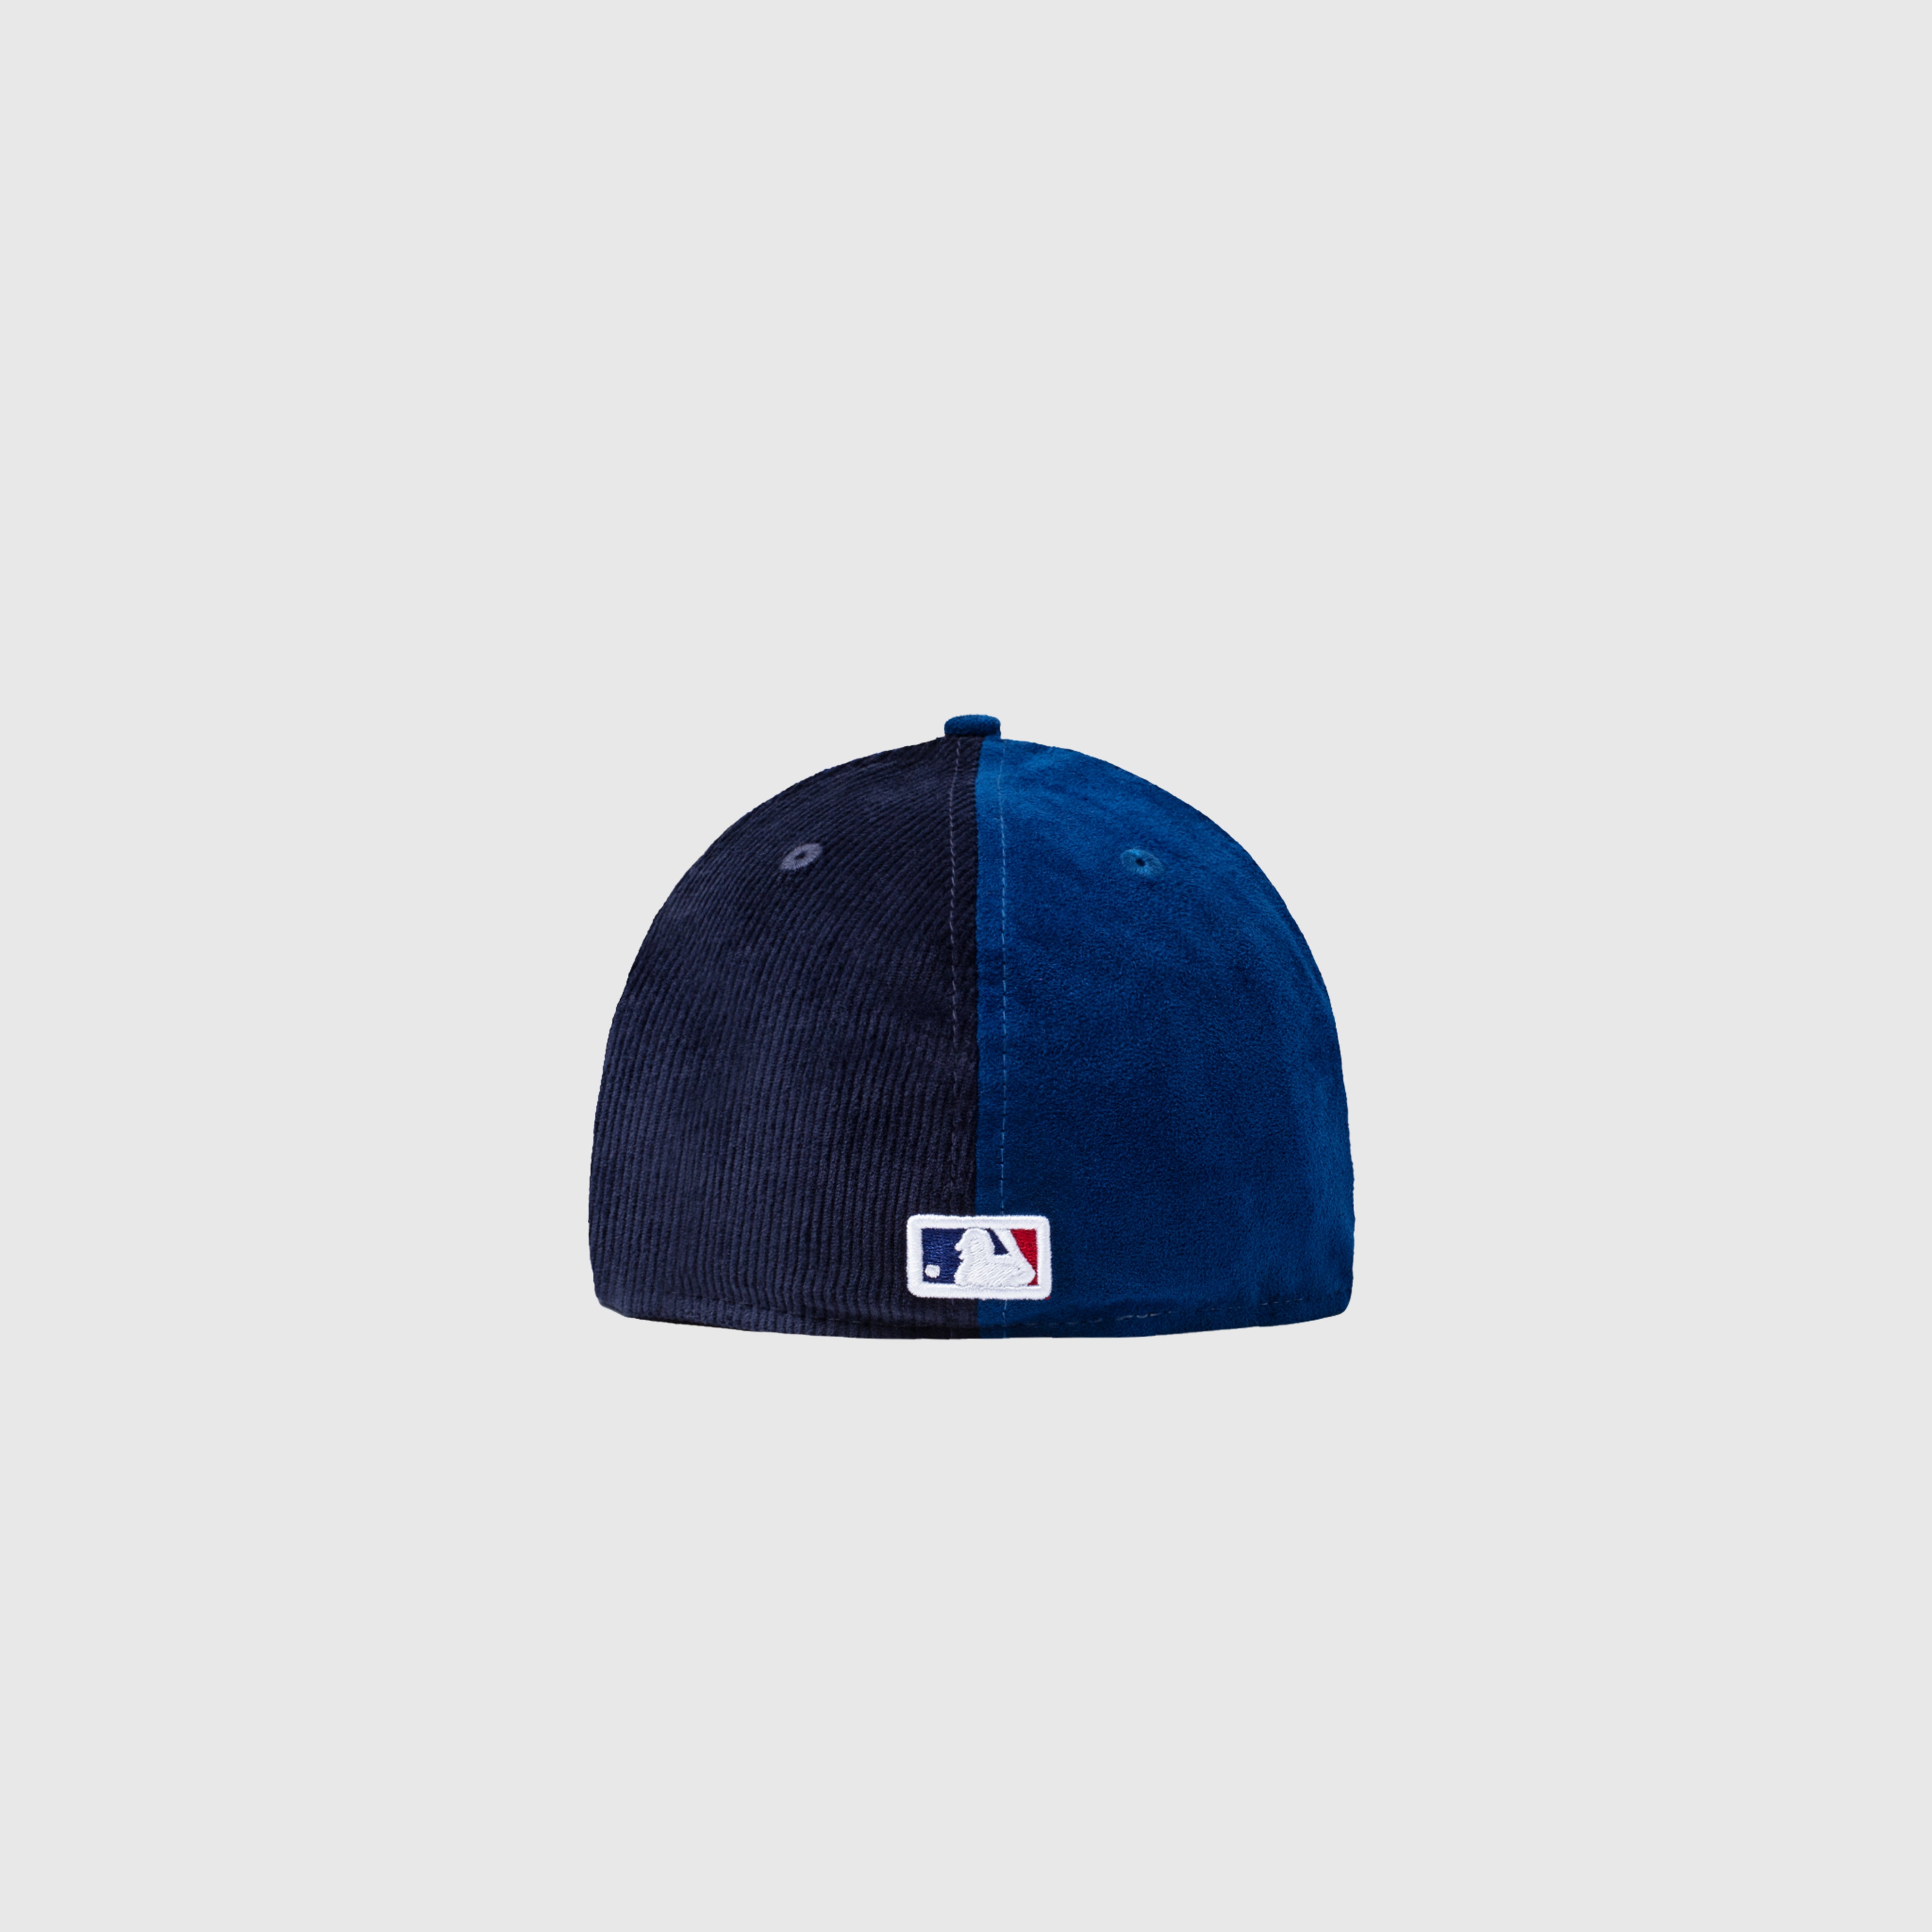 UrlfreezeShops X NEW ERA LOS ANGELES DODGERS 59FIFTY FITTED "PATCHWORK"